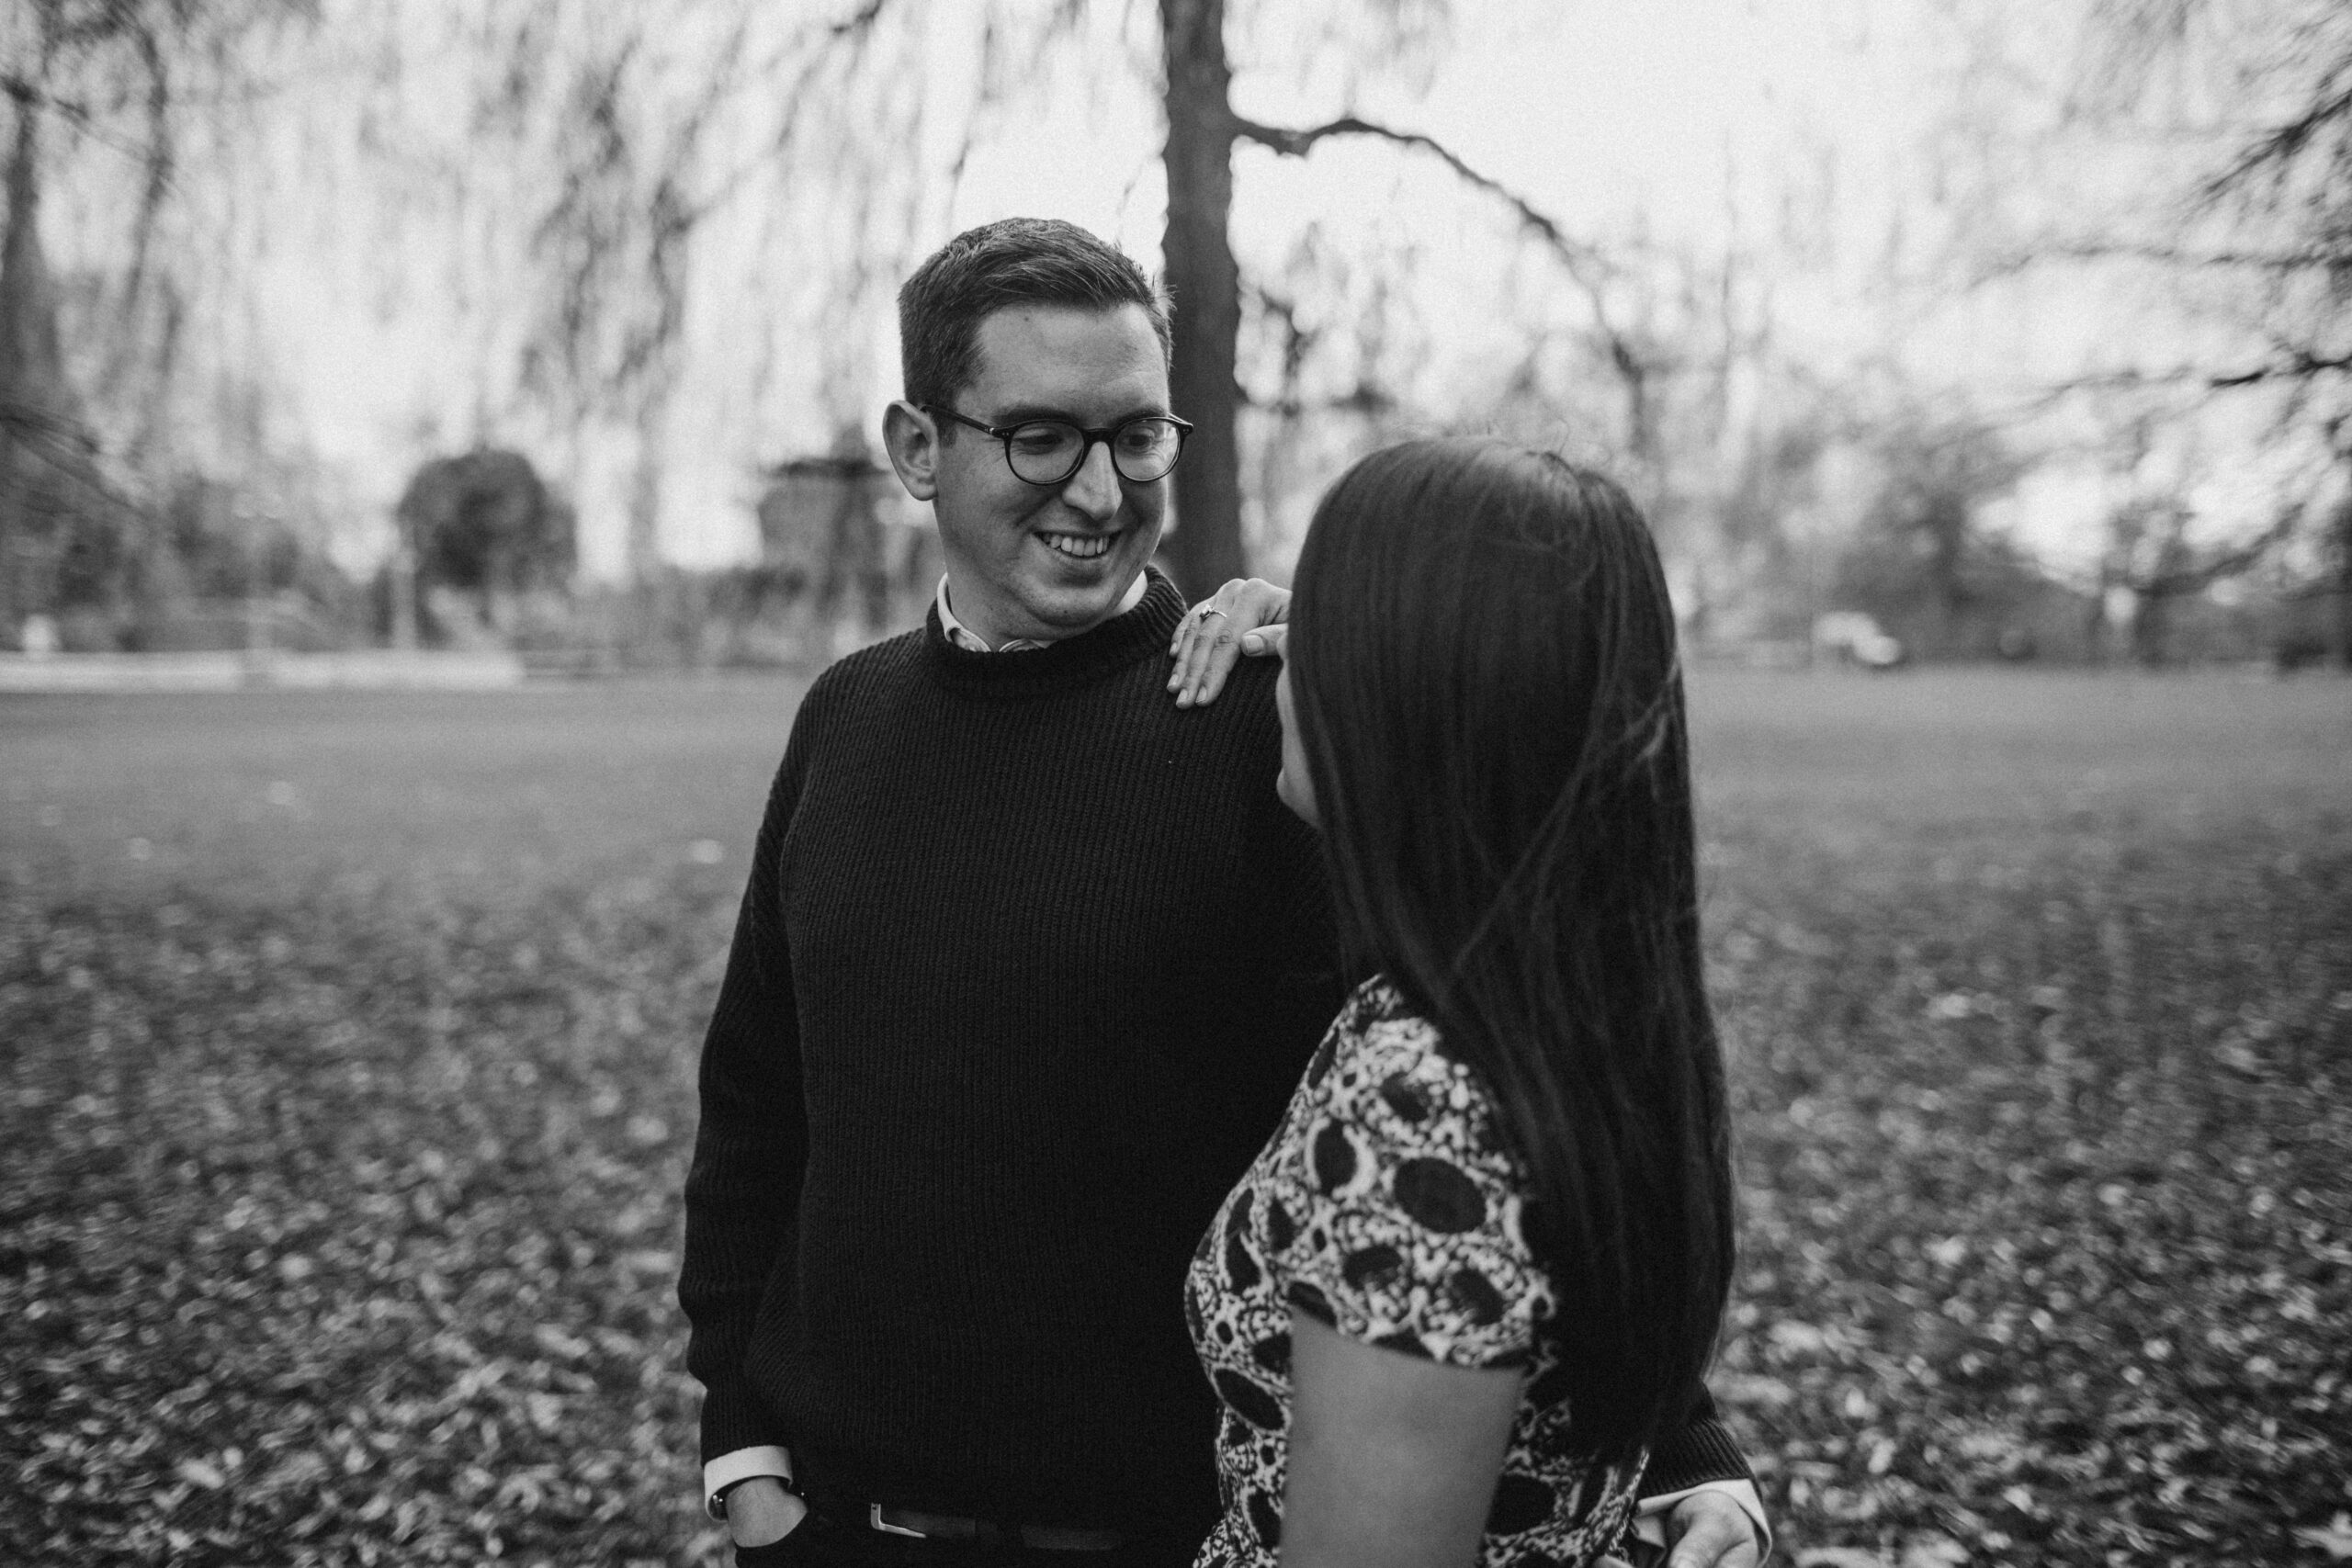 Playful engagement poses in the heart of London's Clissold Park